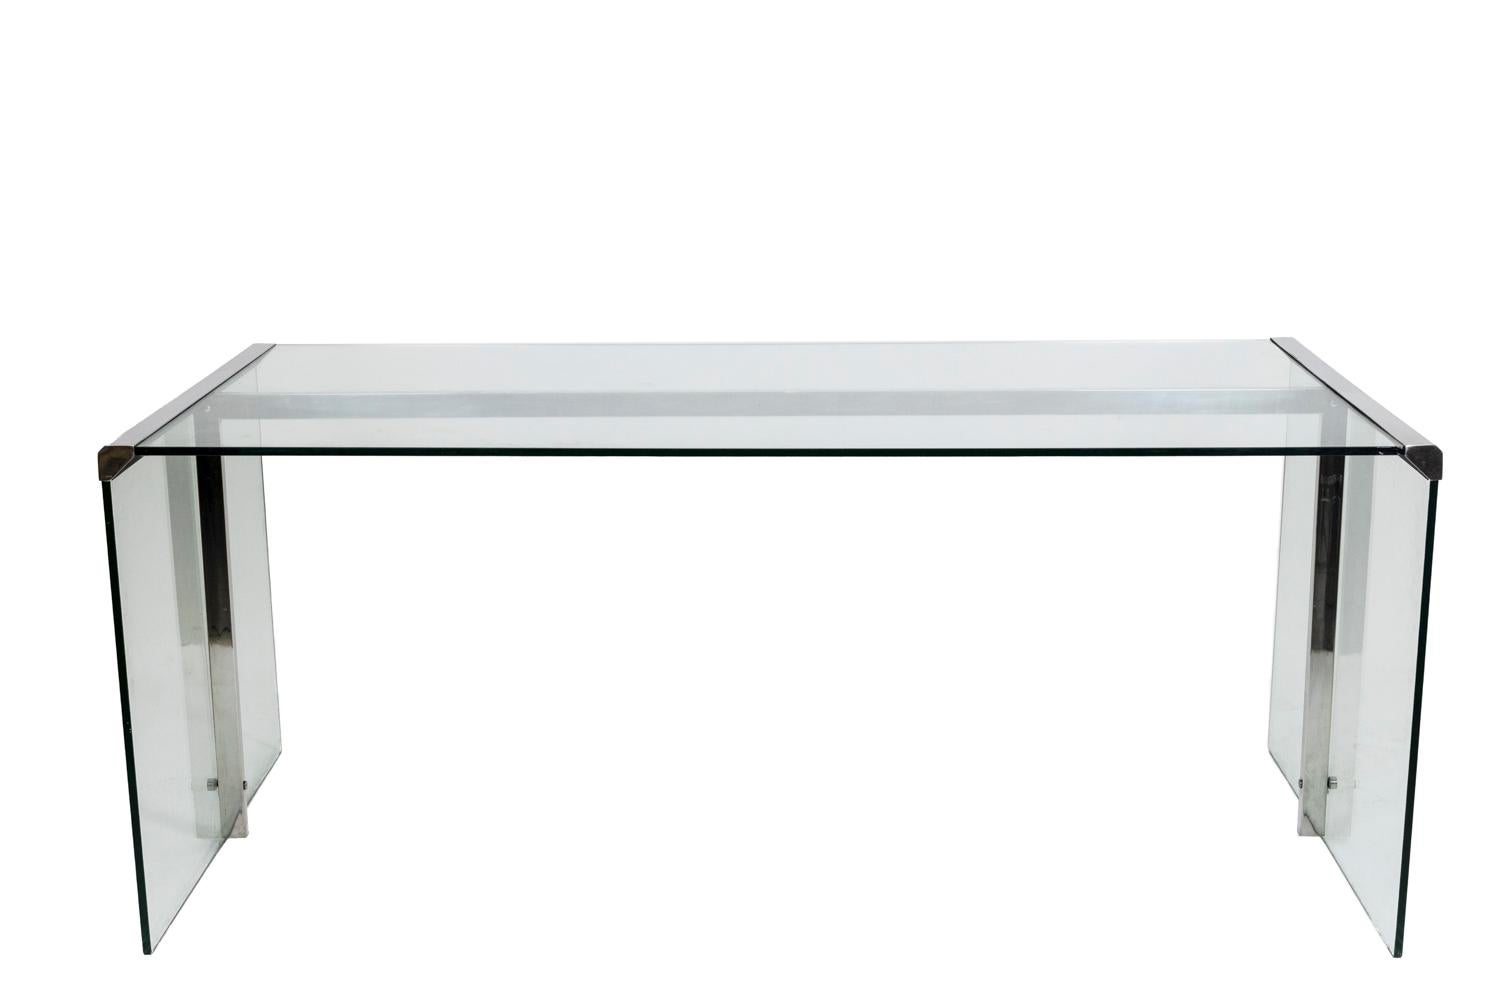 Gallotti&Radice, attributed to. 

Desk in glass, in rectangulare shape. Chrome metal assembly.

Italian work realized in the 1970s.

Dimensions : H x W 175 x D 76 cm.